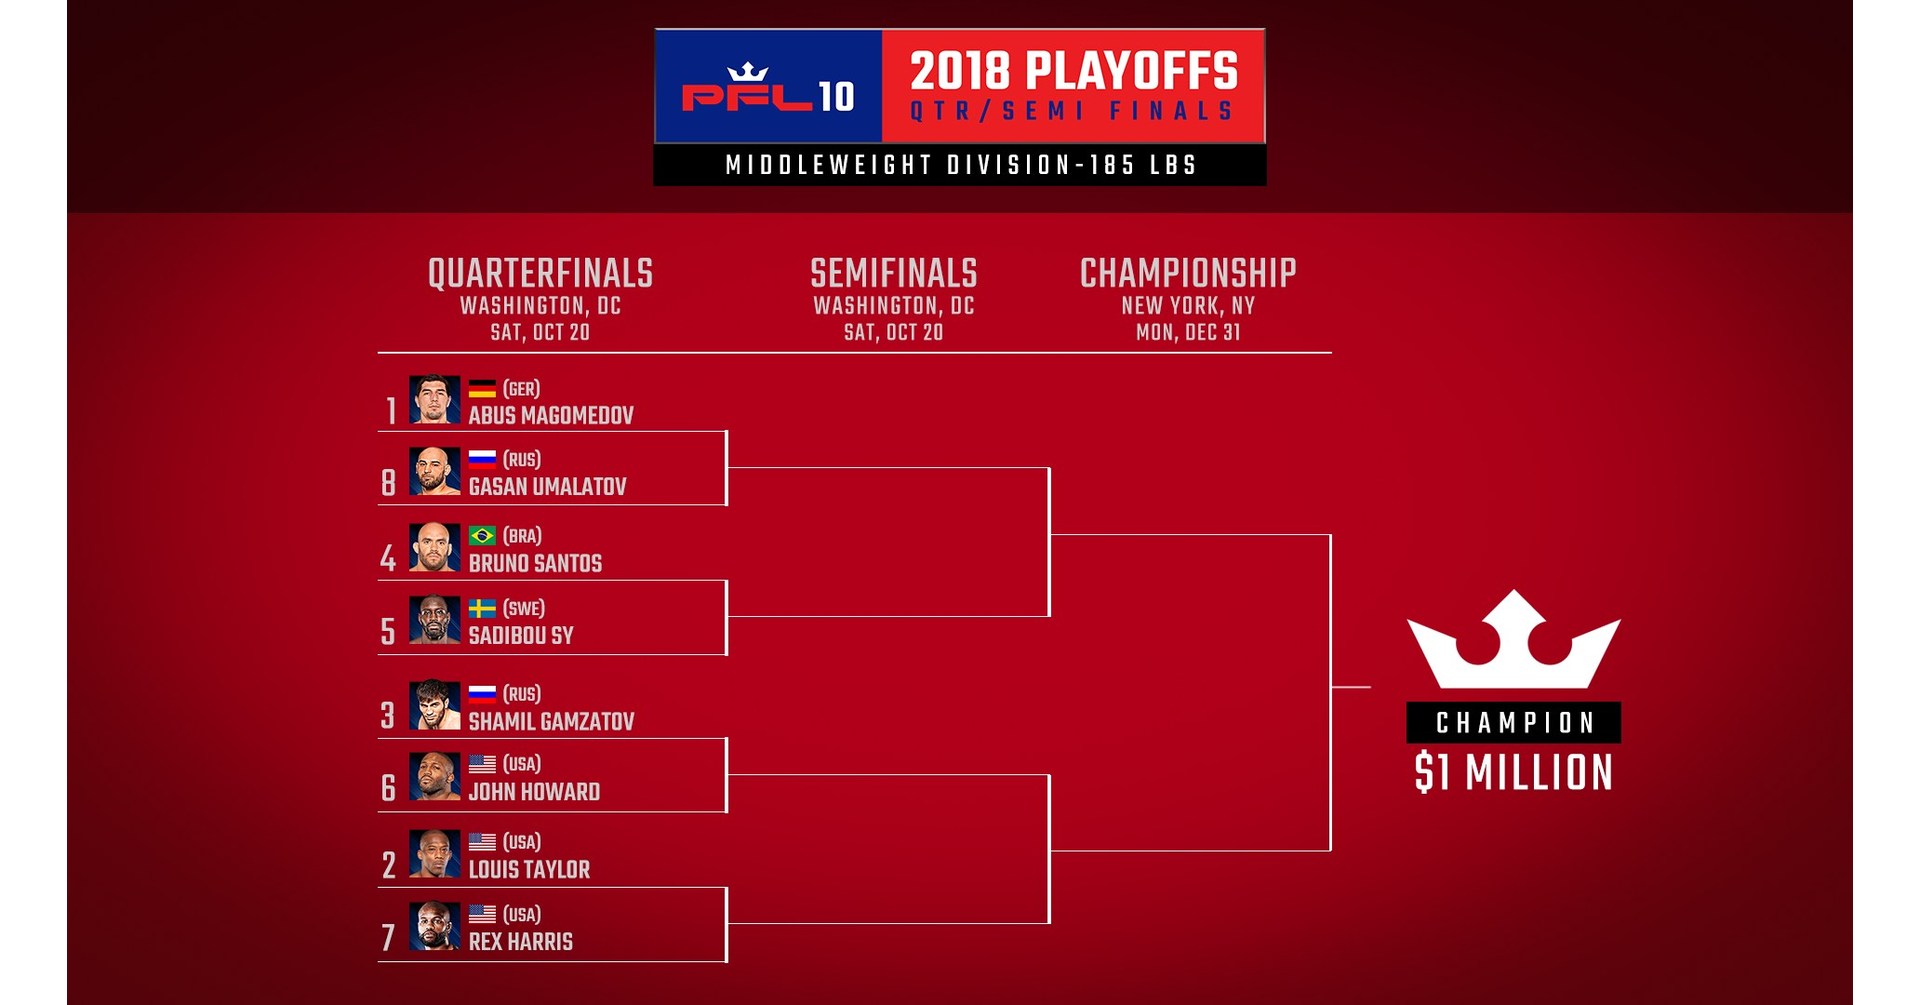 Professional Fighters League (PFL) Announces Official Playoff Brackets